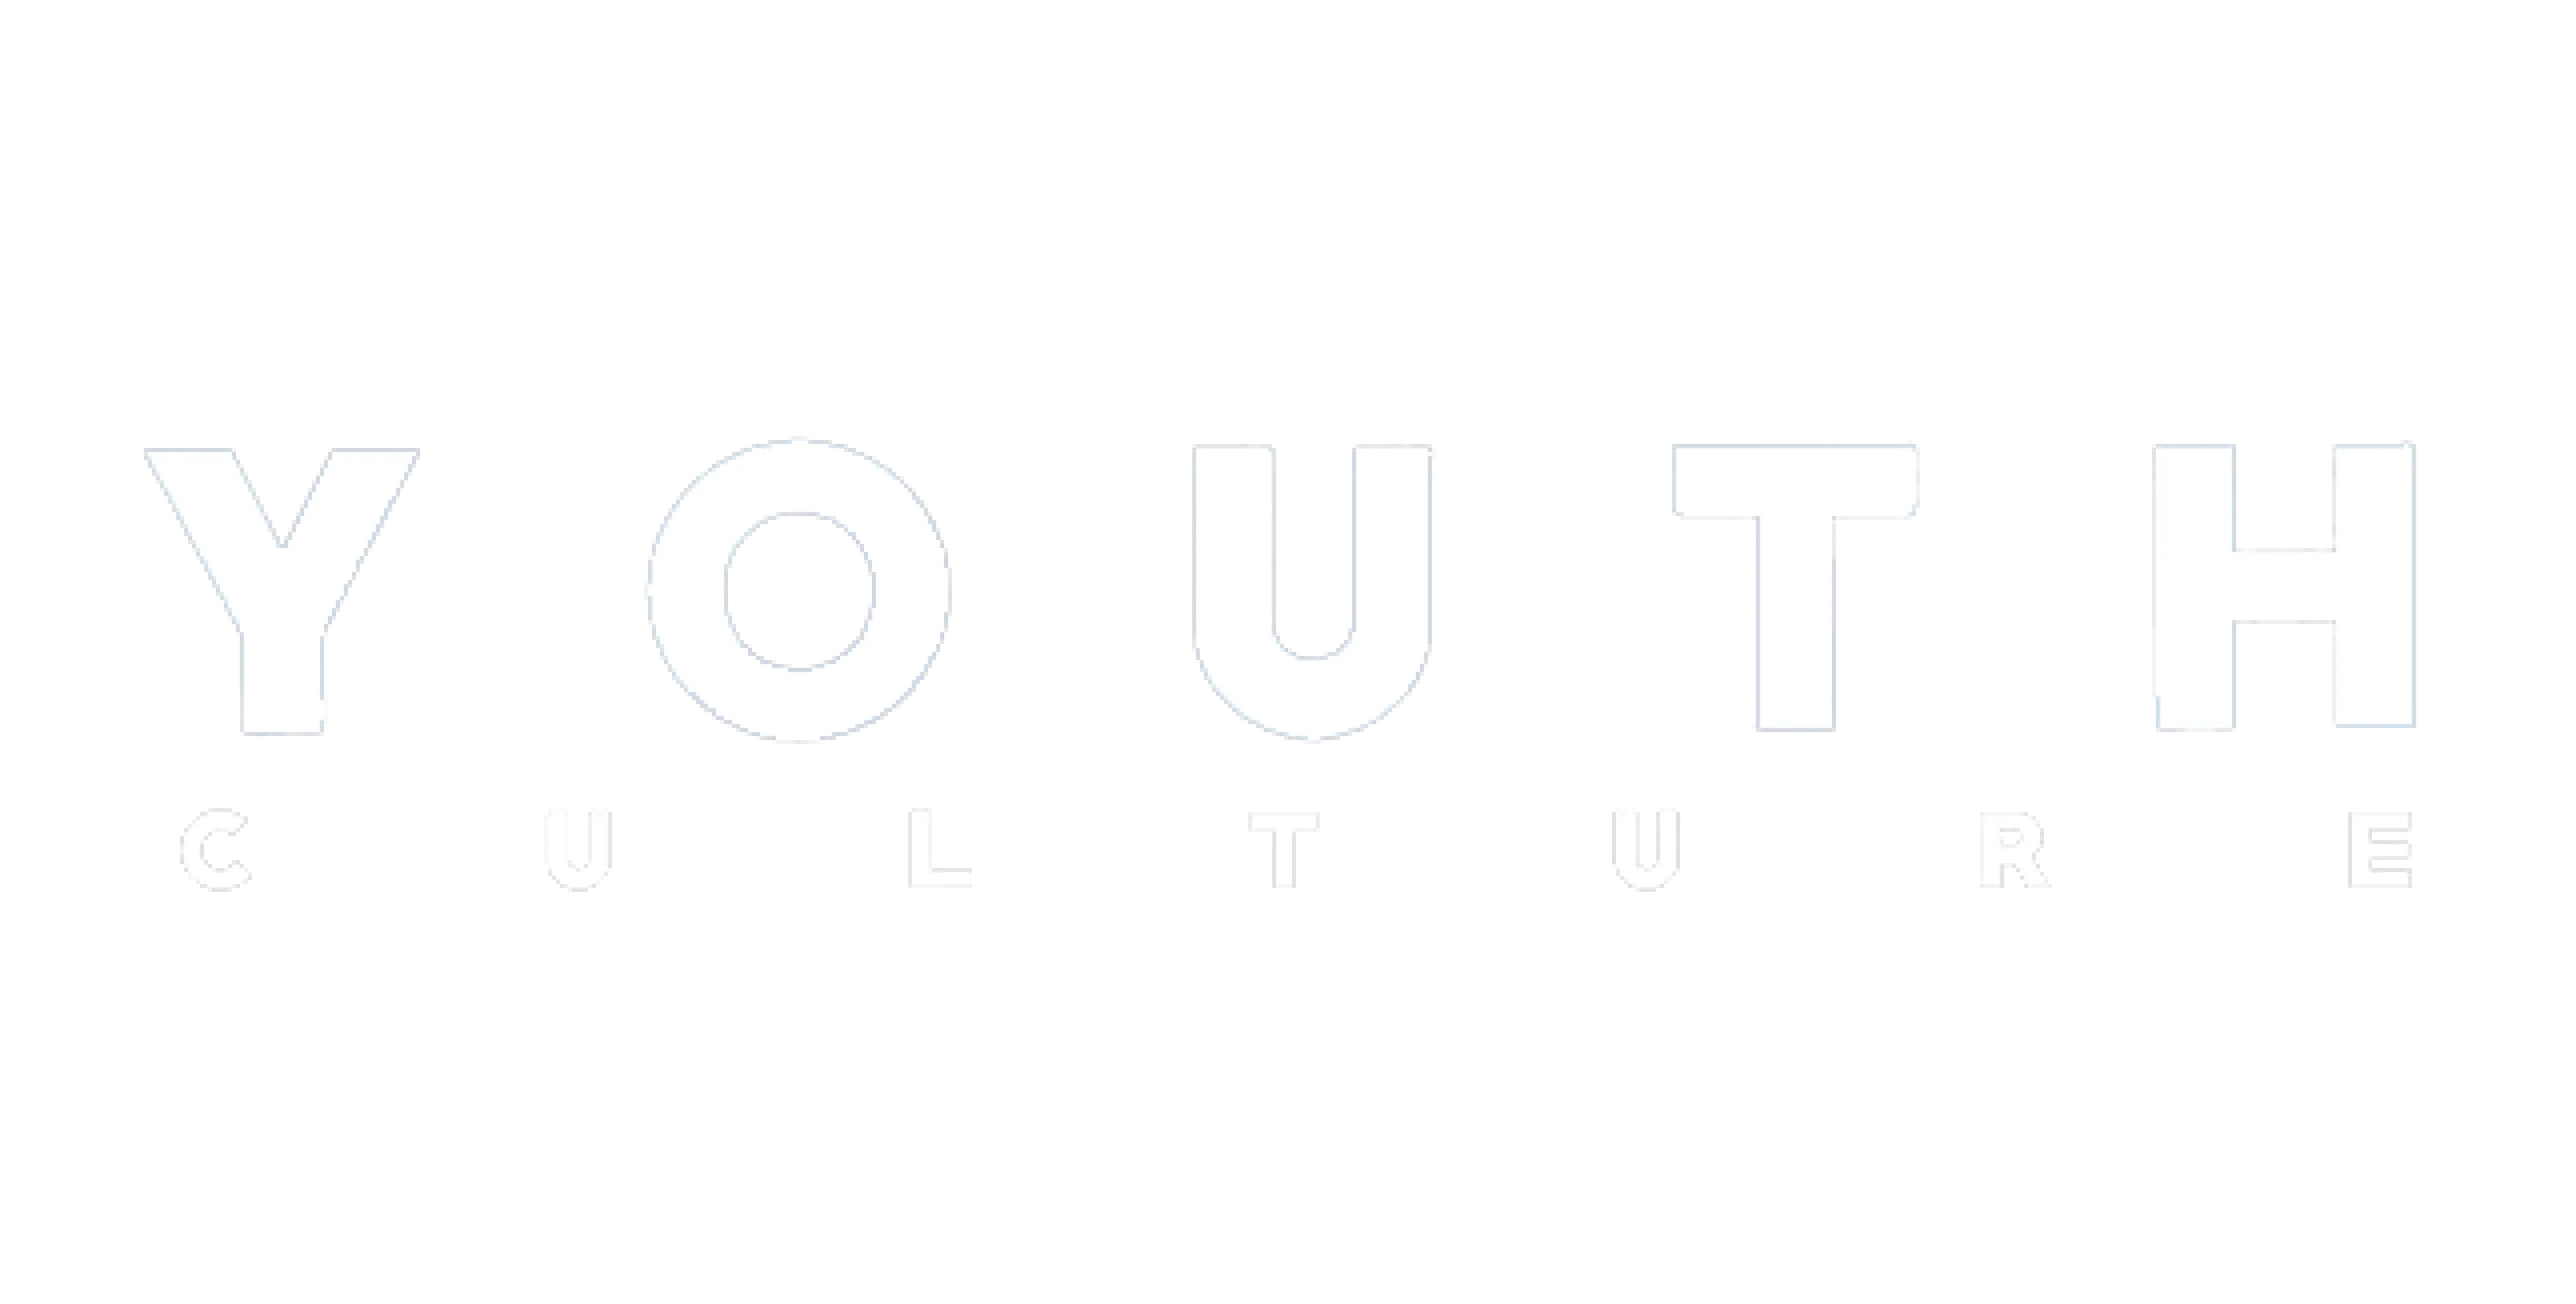 Youth Culture Inc